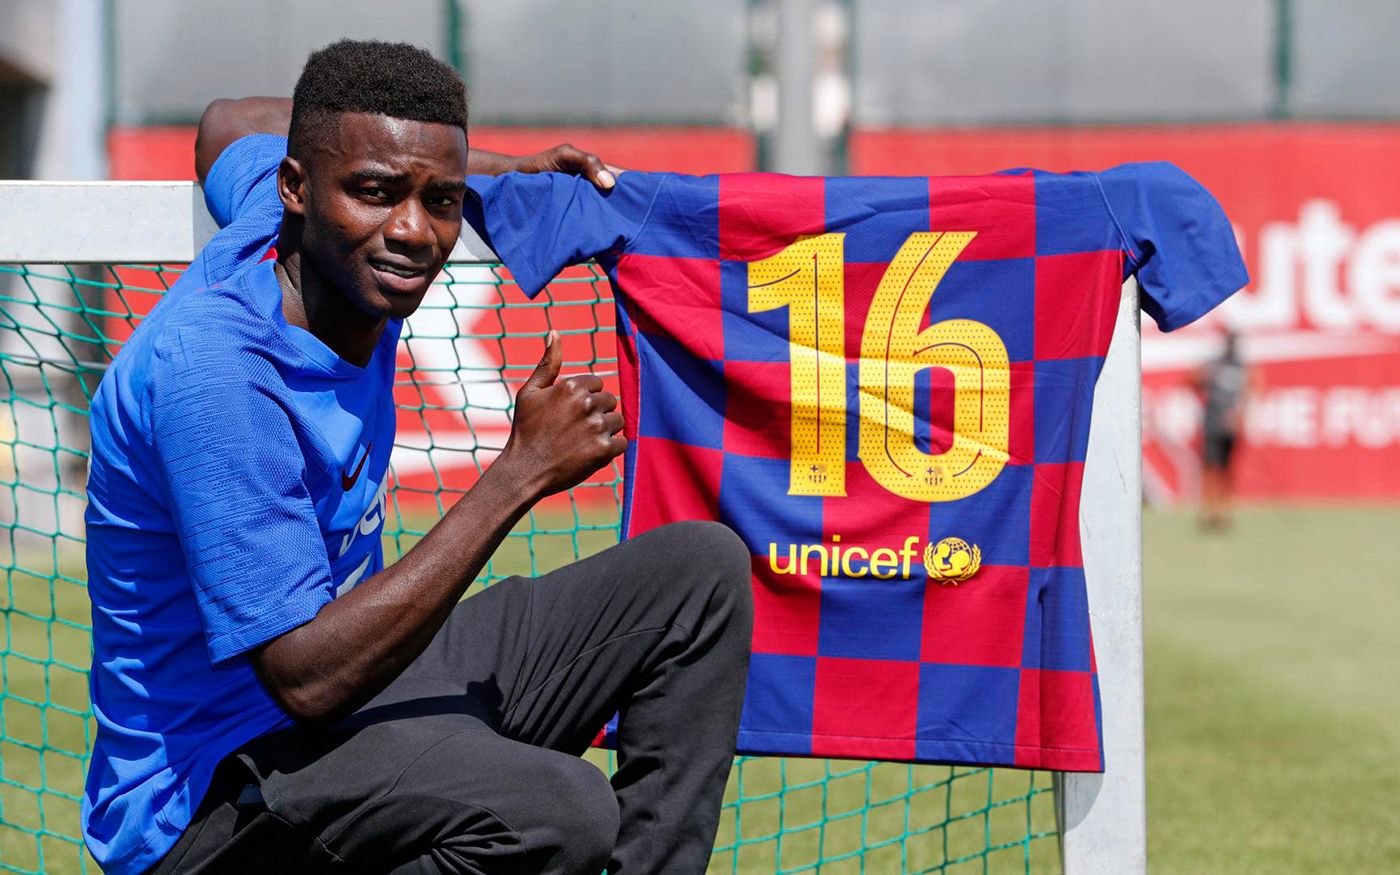 Moussa Wagué, posing with his new T-shirt in FC Barcelona